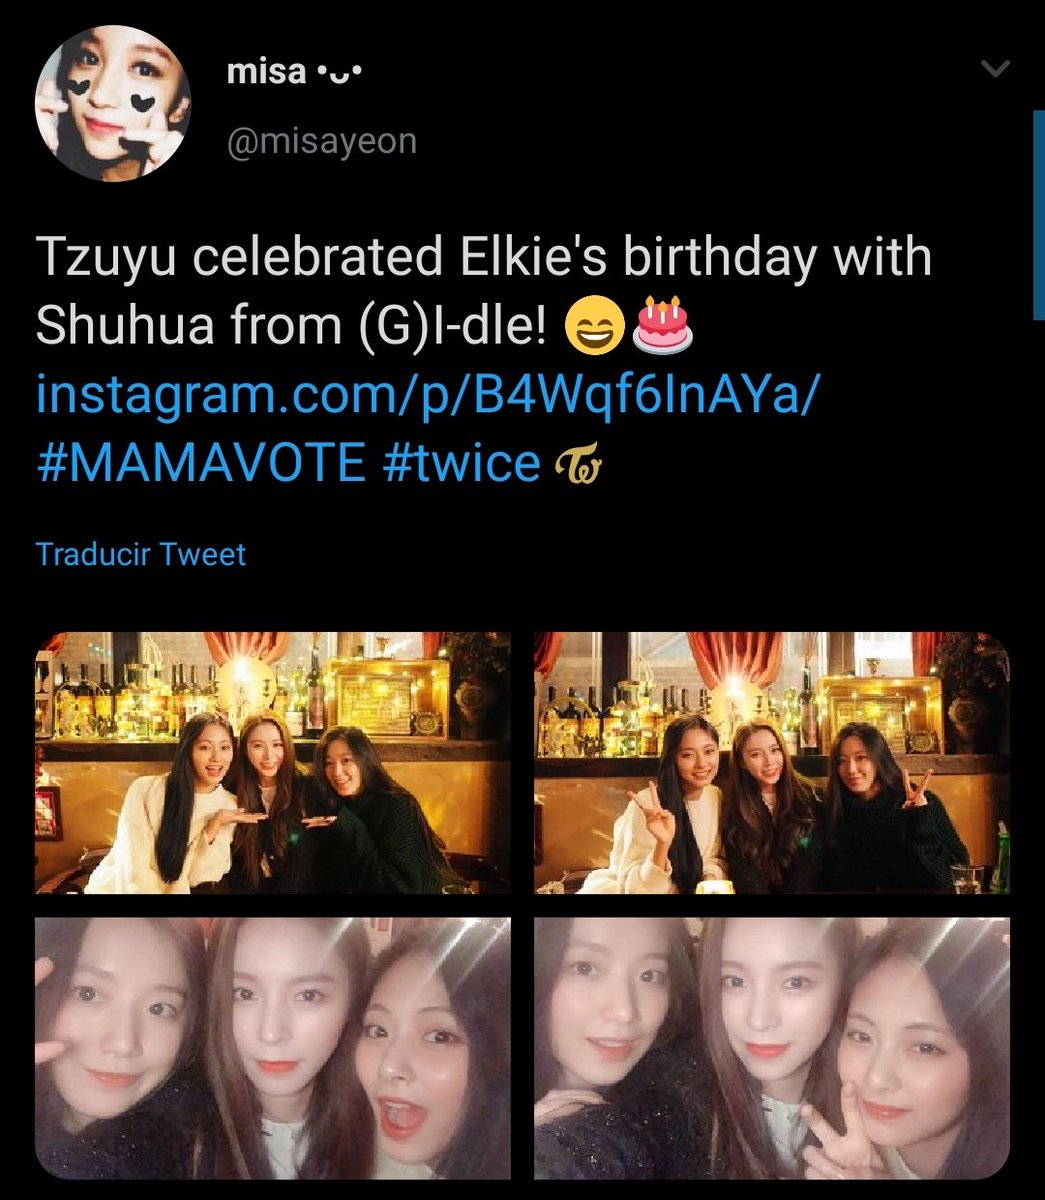 they edited elkie of the photo and called her a lucky fan, this pic was taken when they were celebrating elkie's birthday...